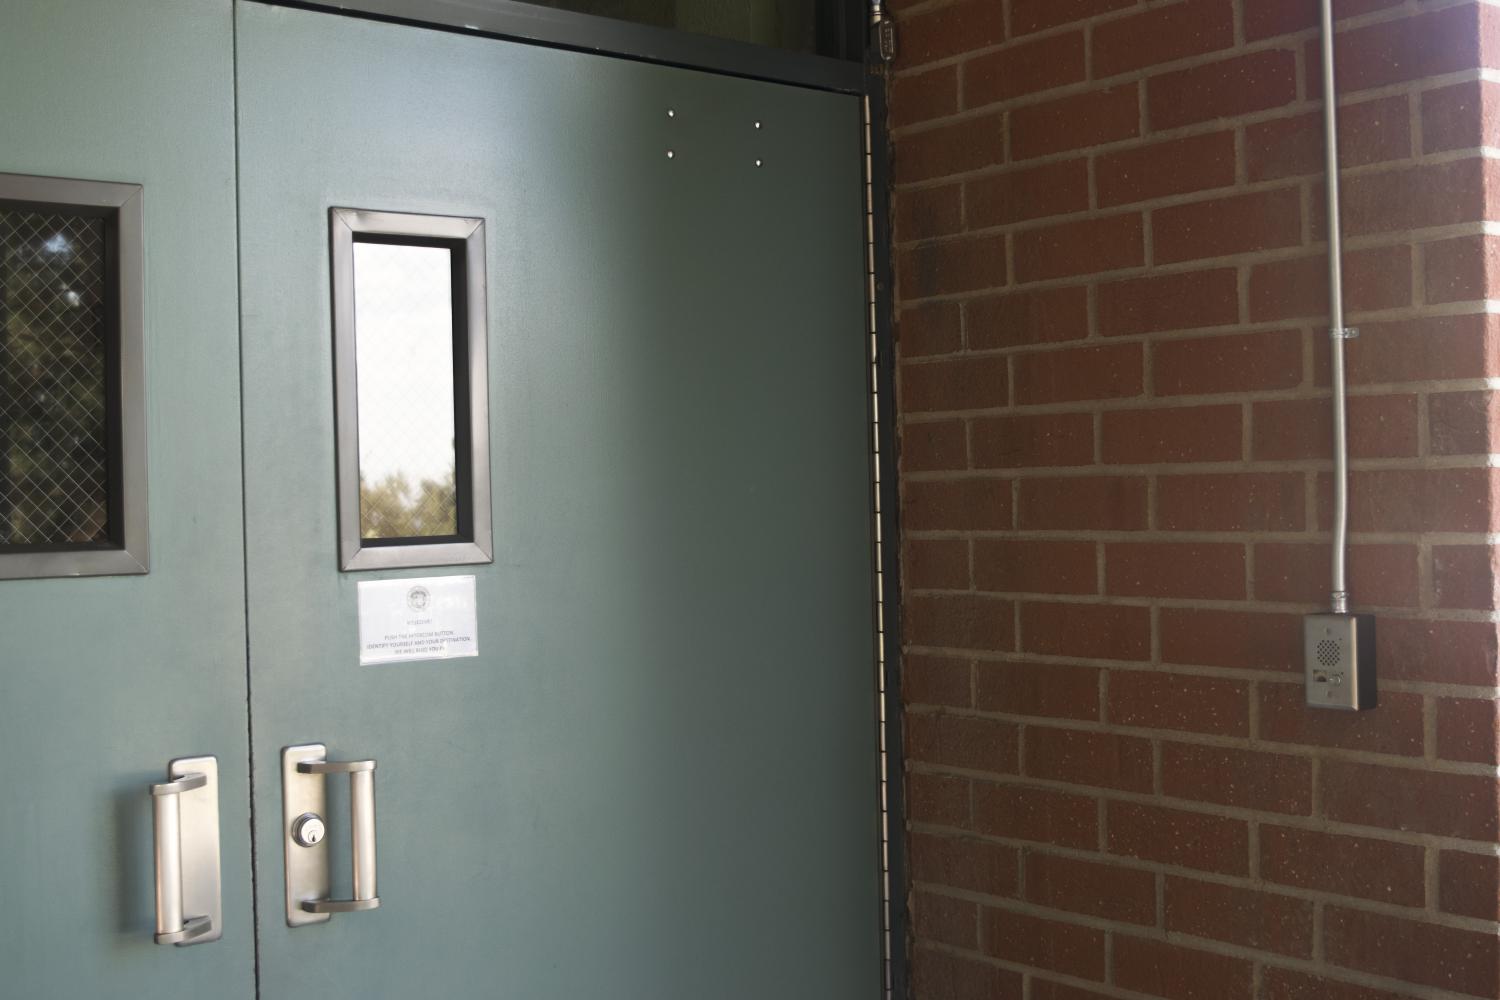 The new front door ensures the campus security